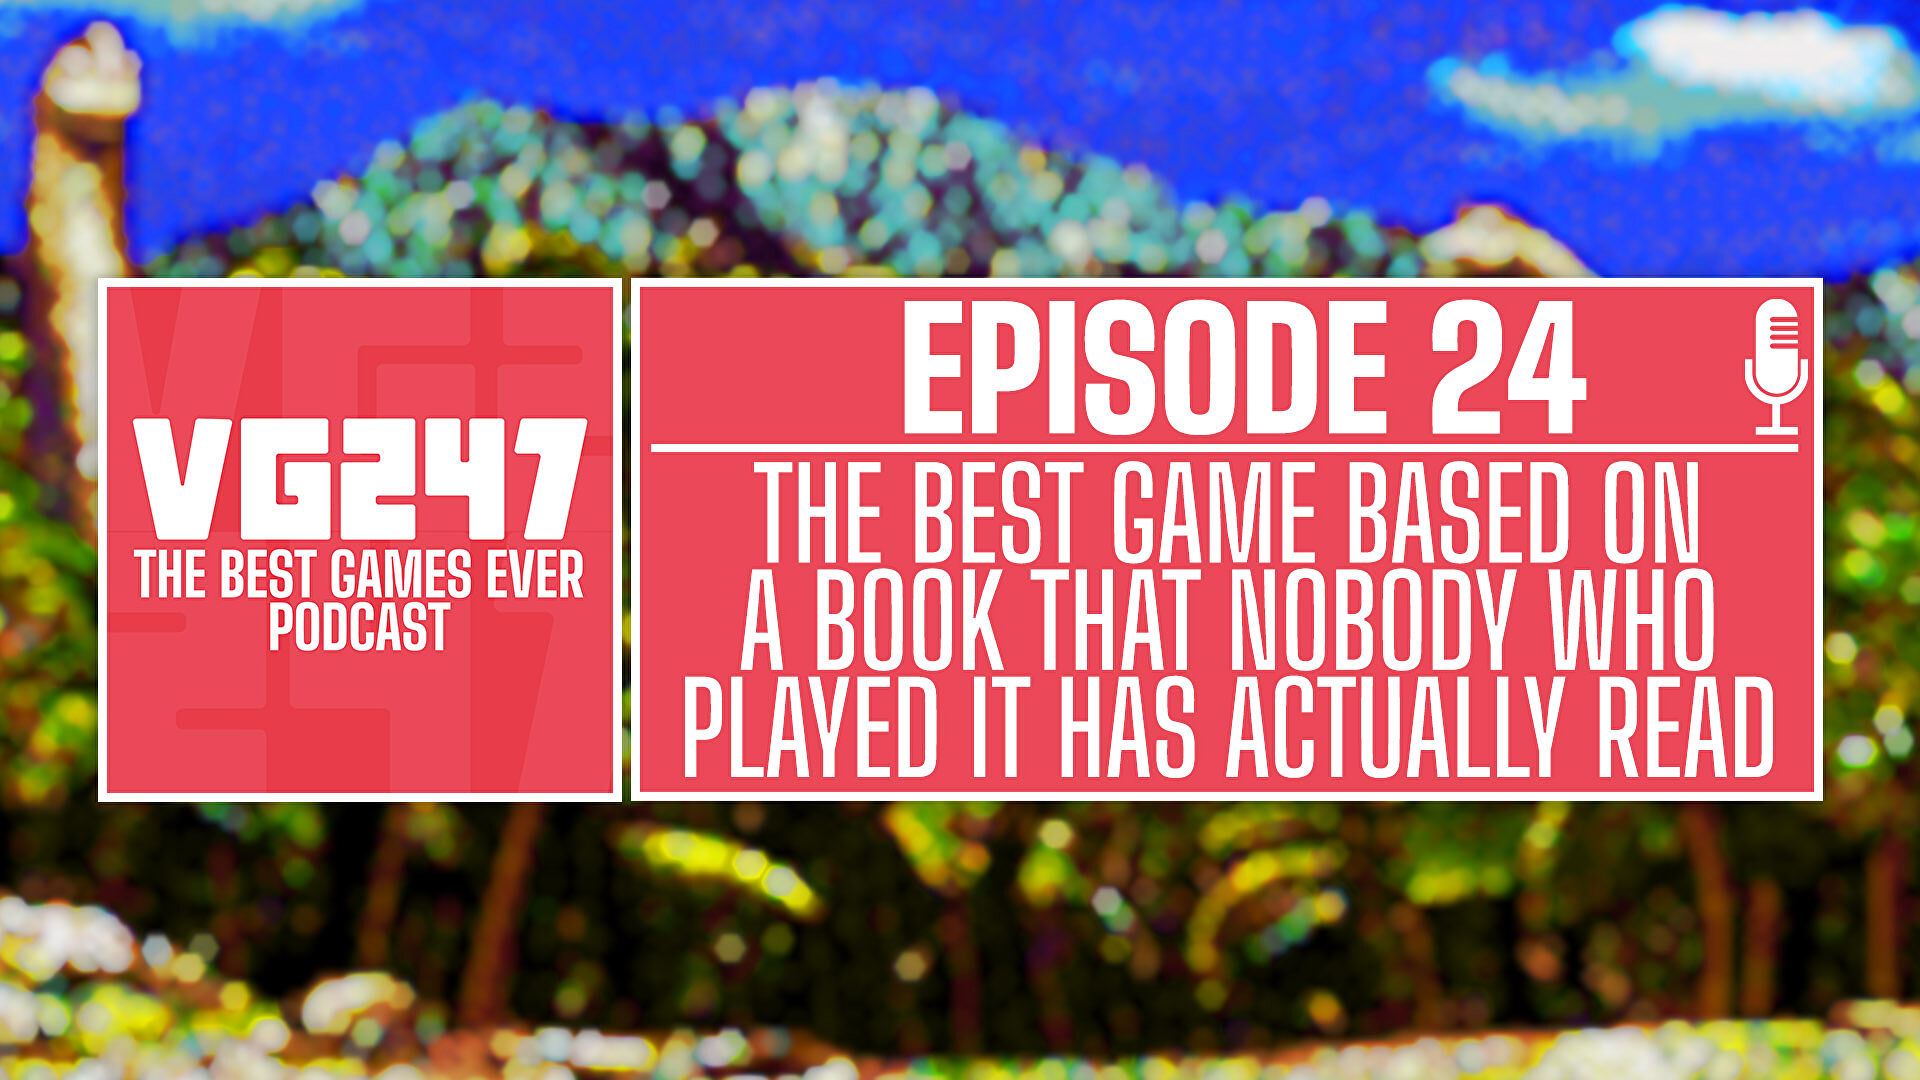 VG247’s The Best Games Ever Podcast – Ep.24: The best game based on a book that nobody who played it has read